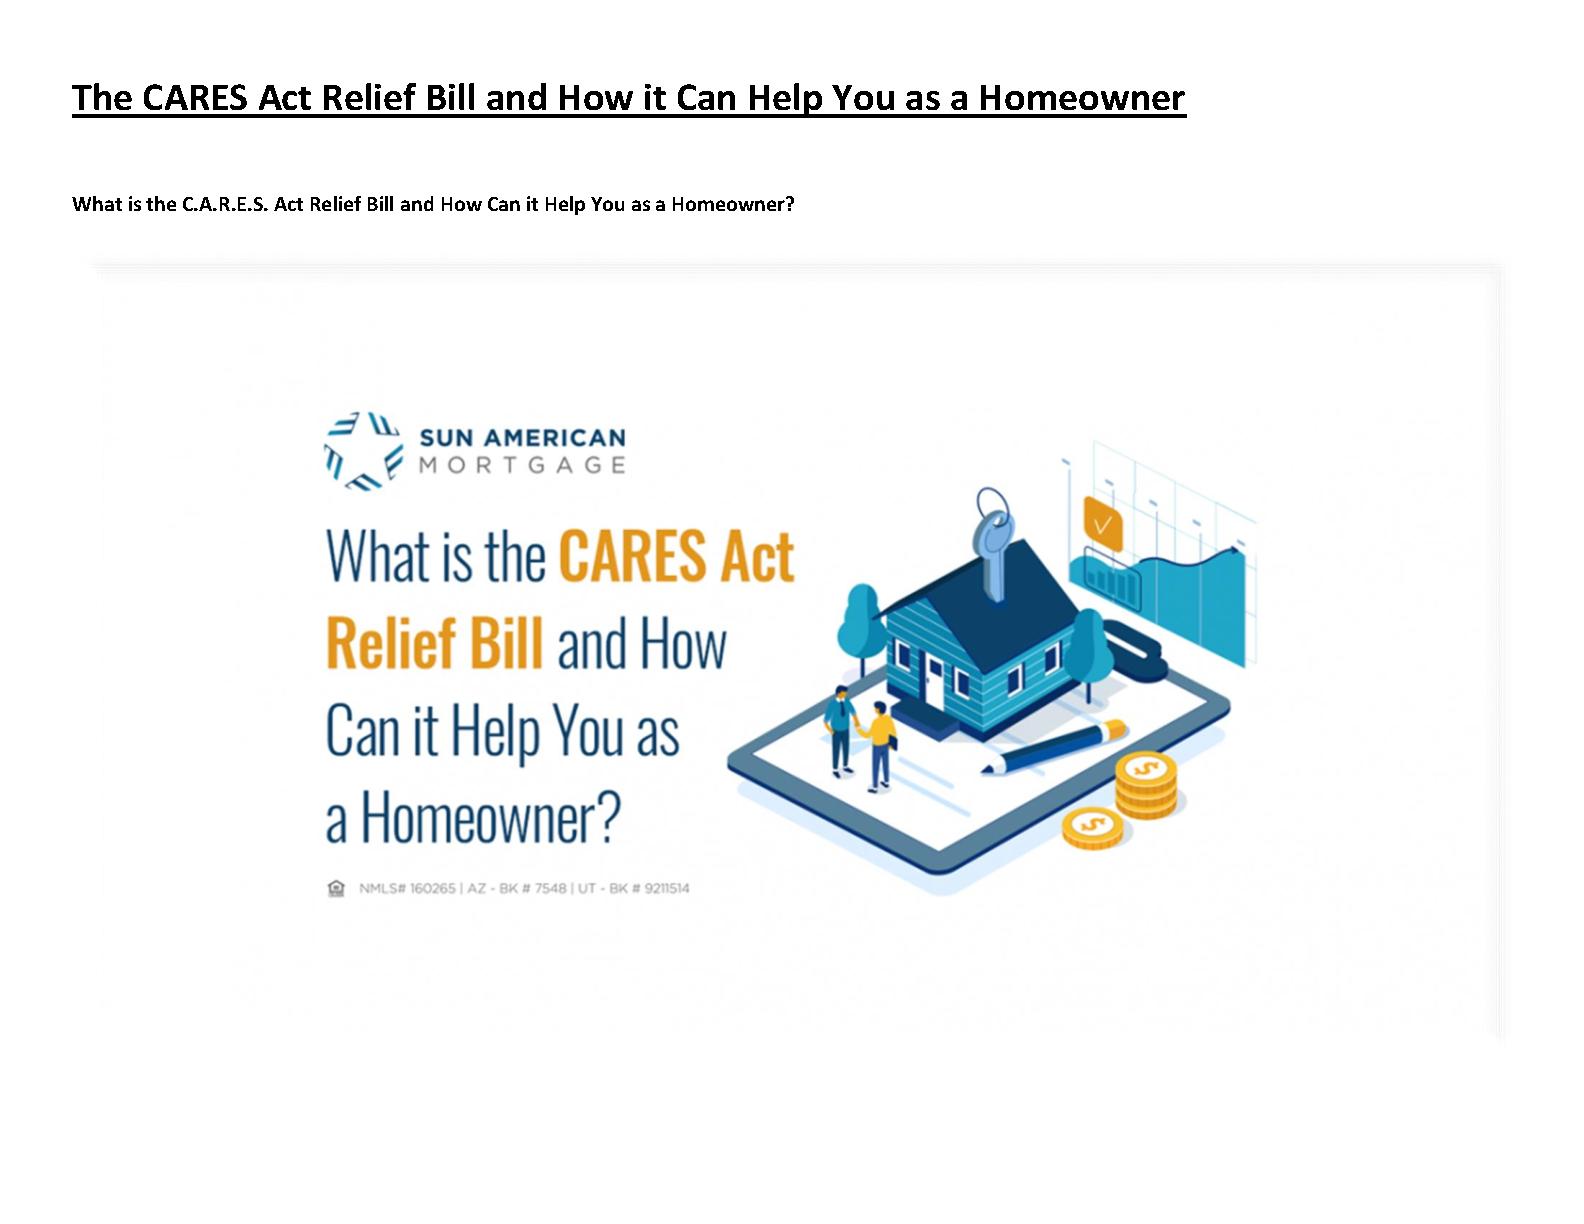 The CARES Act Relief Bill and How it Can Help You as a Homeowner.pdf